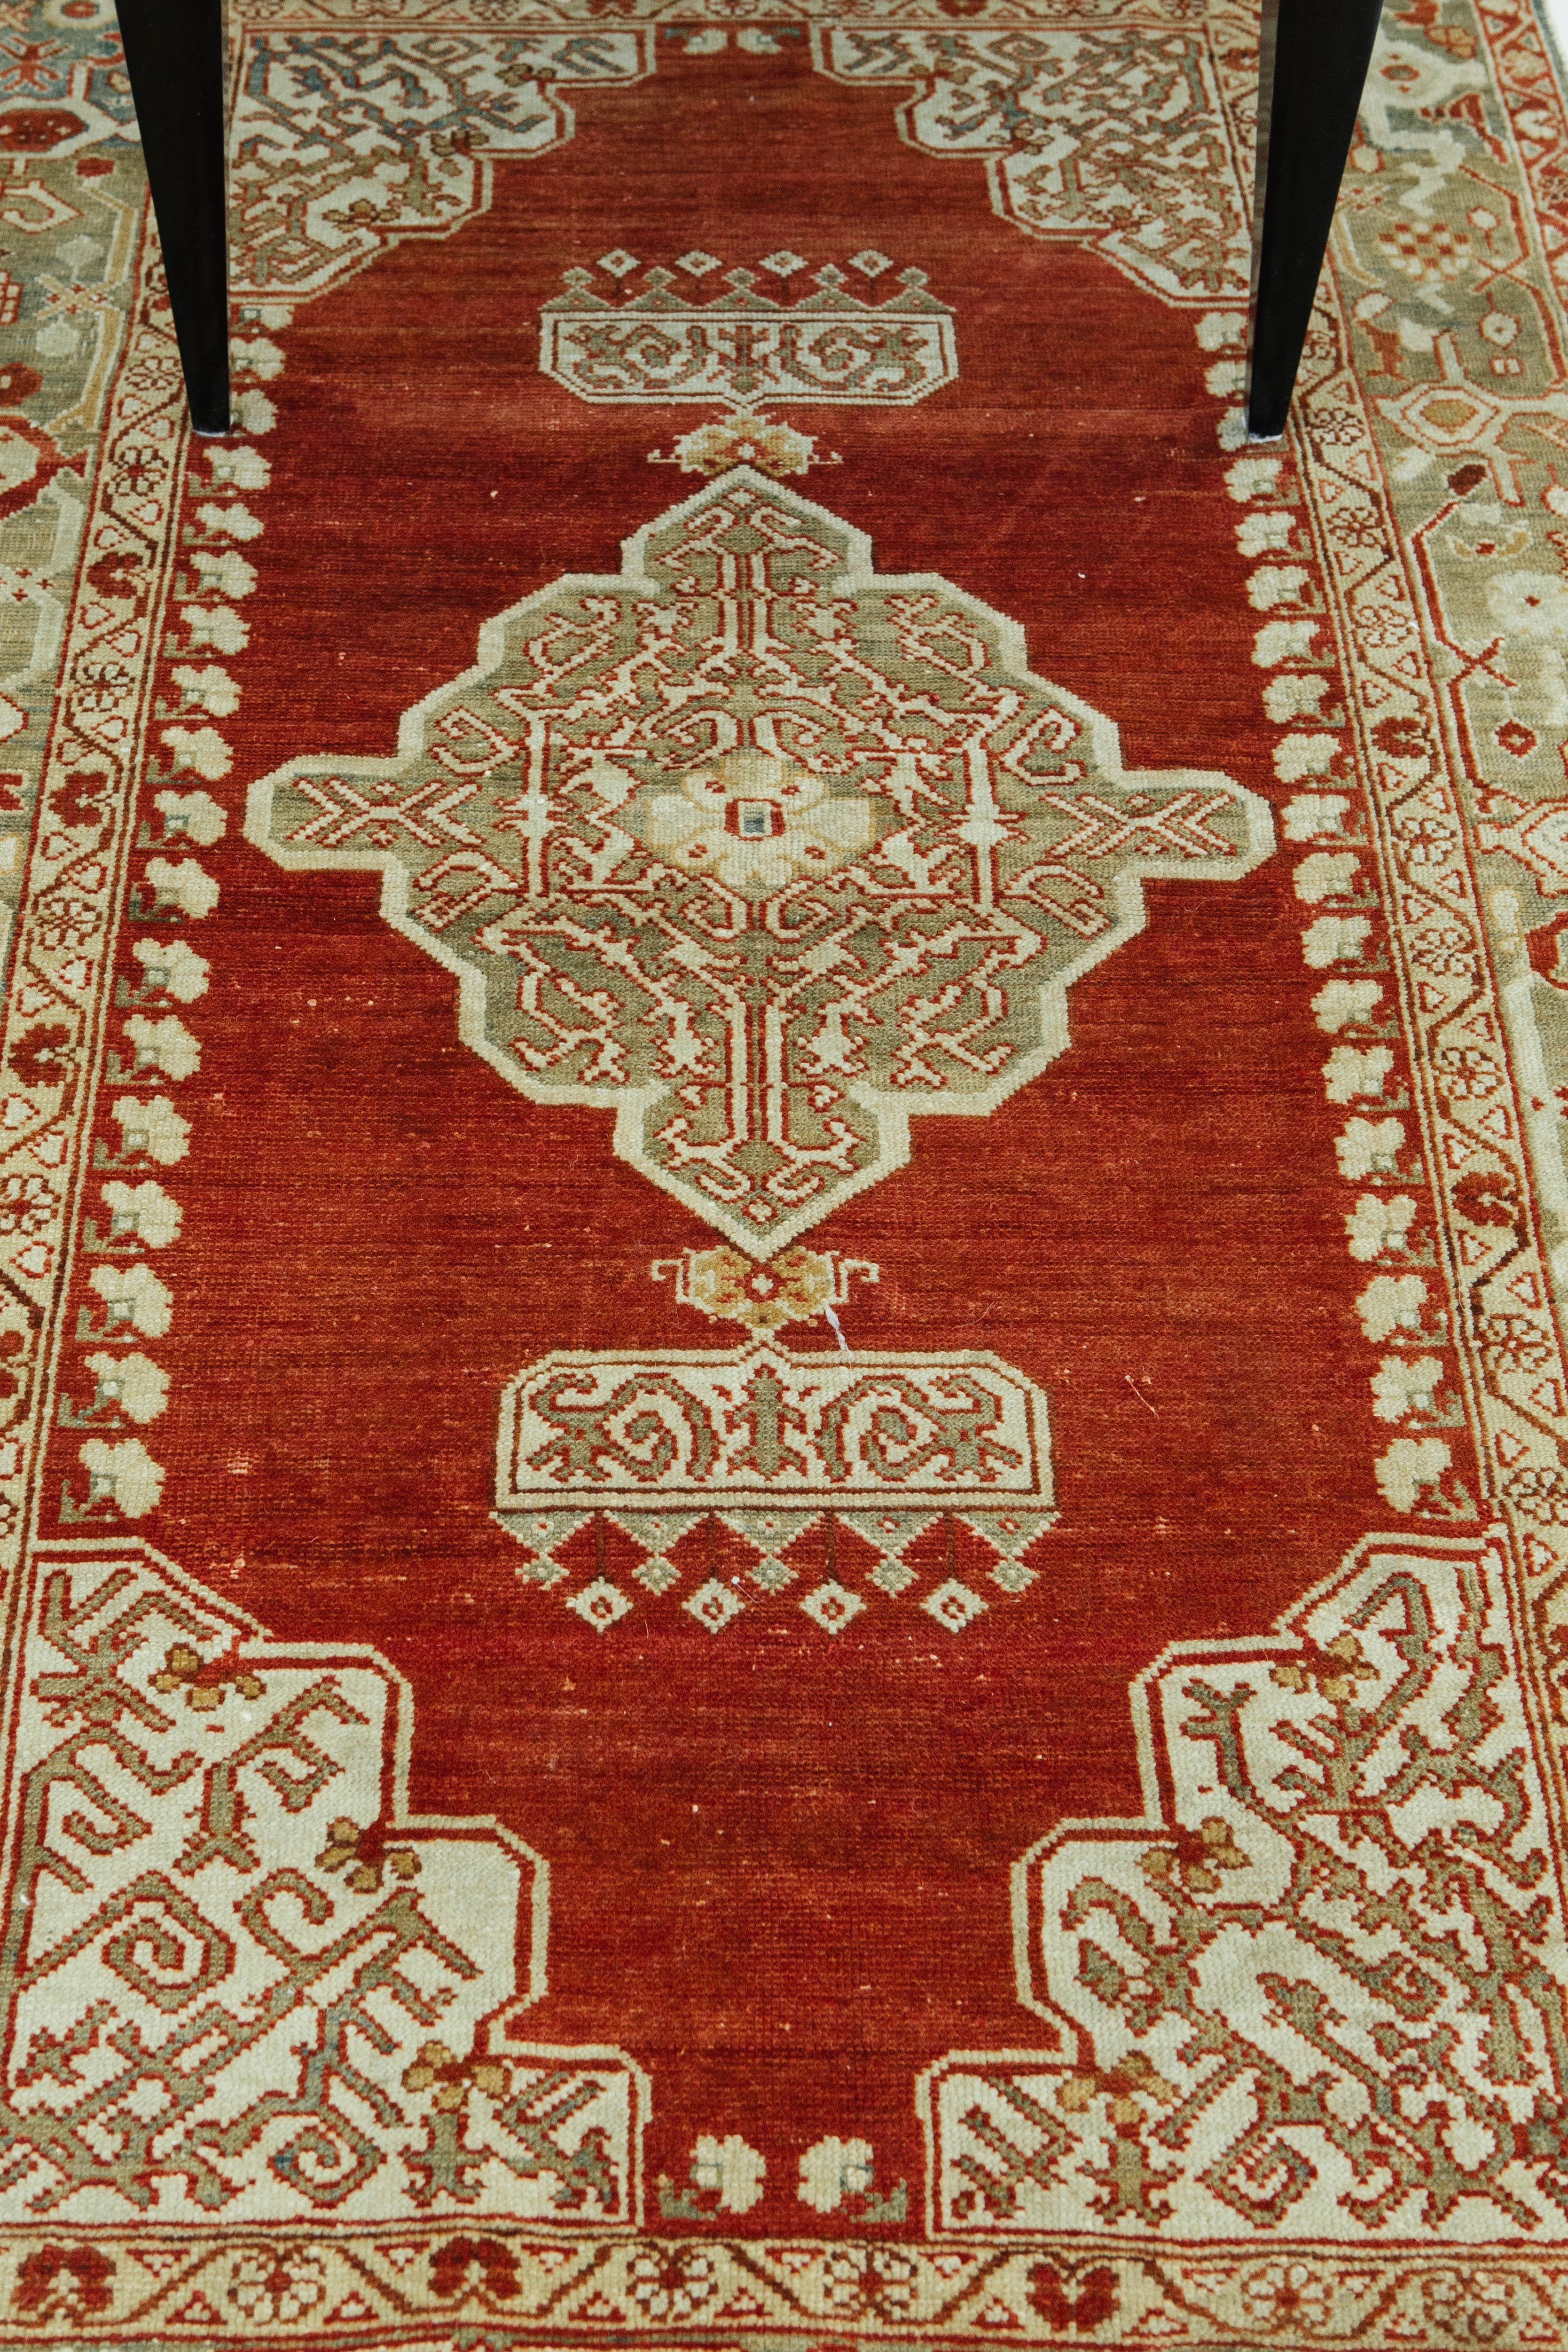 A bold and luxurious vintage Turkish Anatolian rug. This piece has a beautiful cherry red field with golden motifs that attract attention and leave lasting impressions. It showcases traditional Anatolian designs including the central medallion and